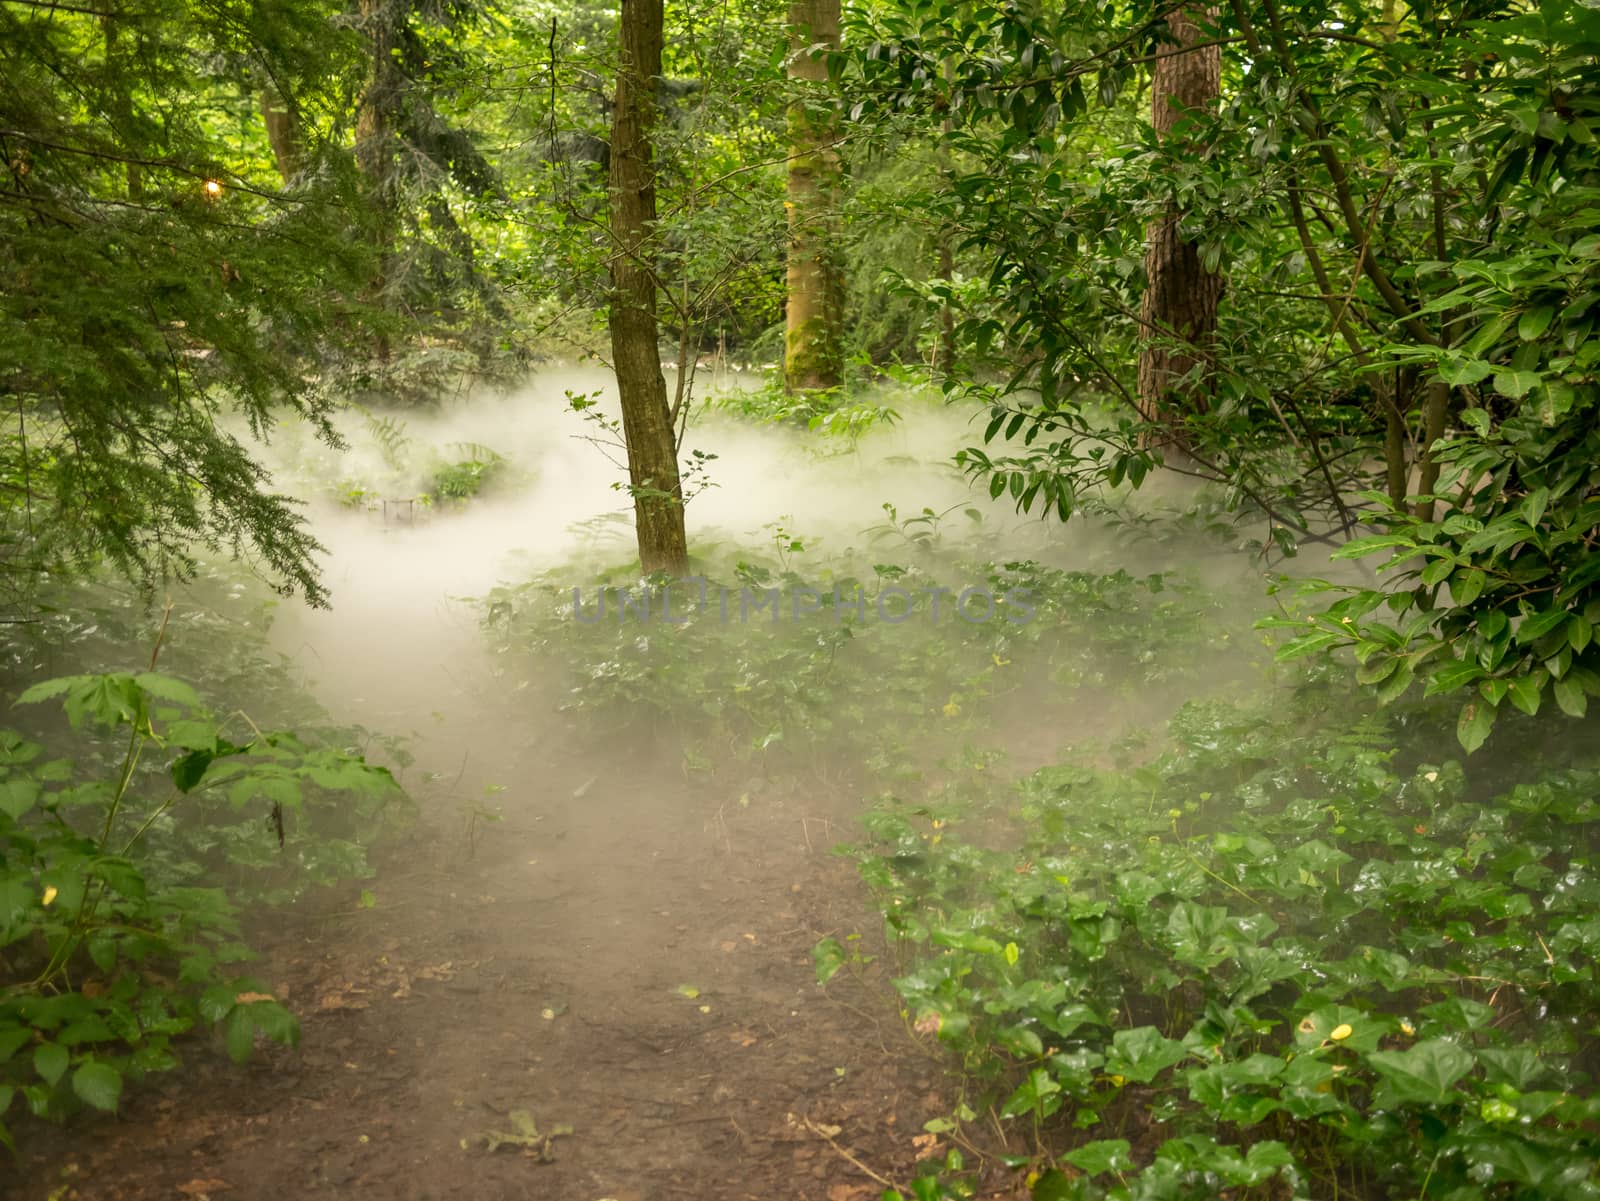 Low hanging fog in a forest area